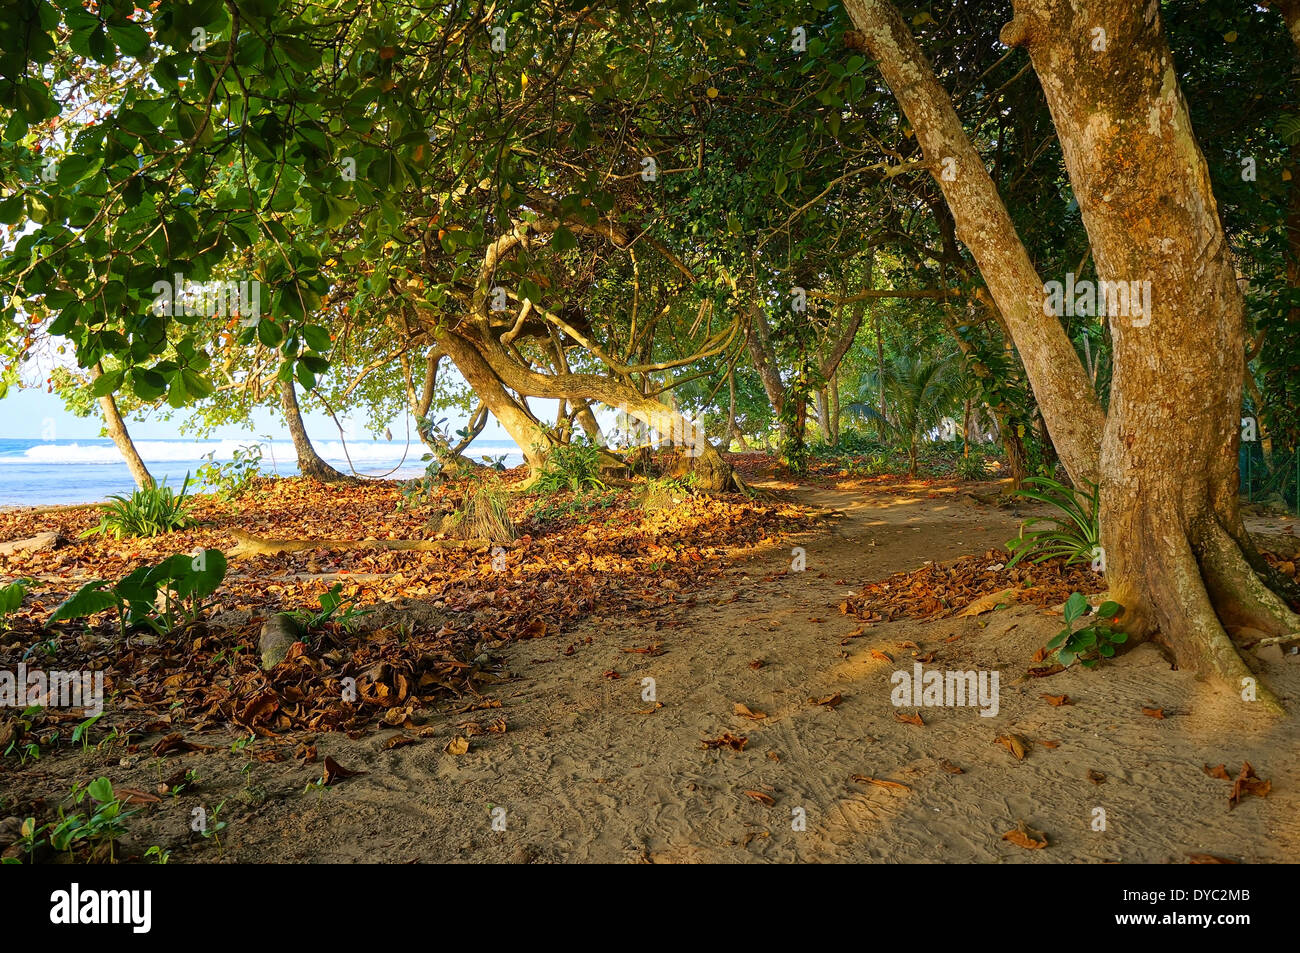 Sandy path under trees along the tropical coast with sunlight through the foliage, Caribbean, Puerto Viejo, Costa Rica Stock Photo